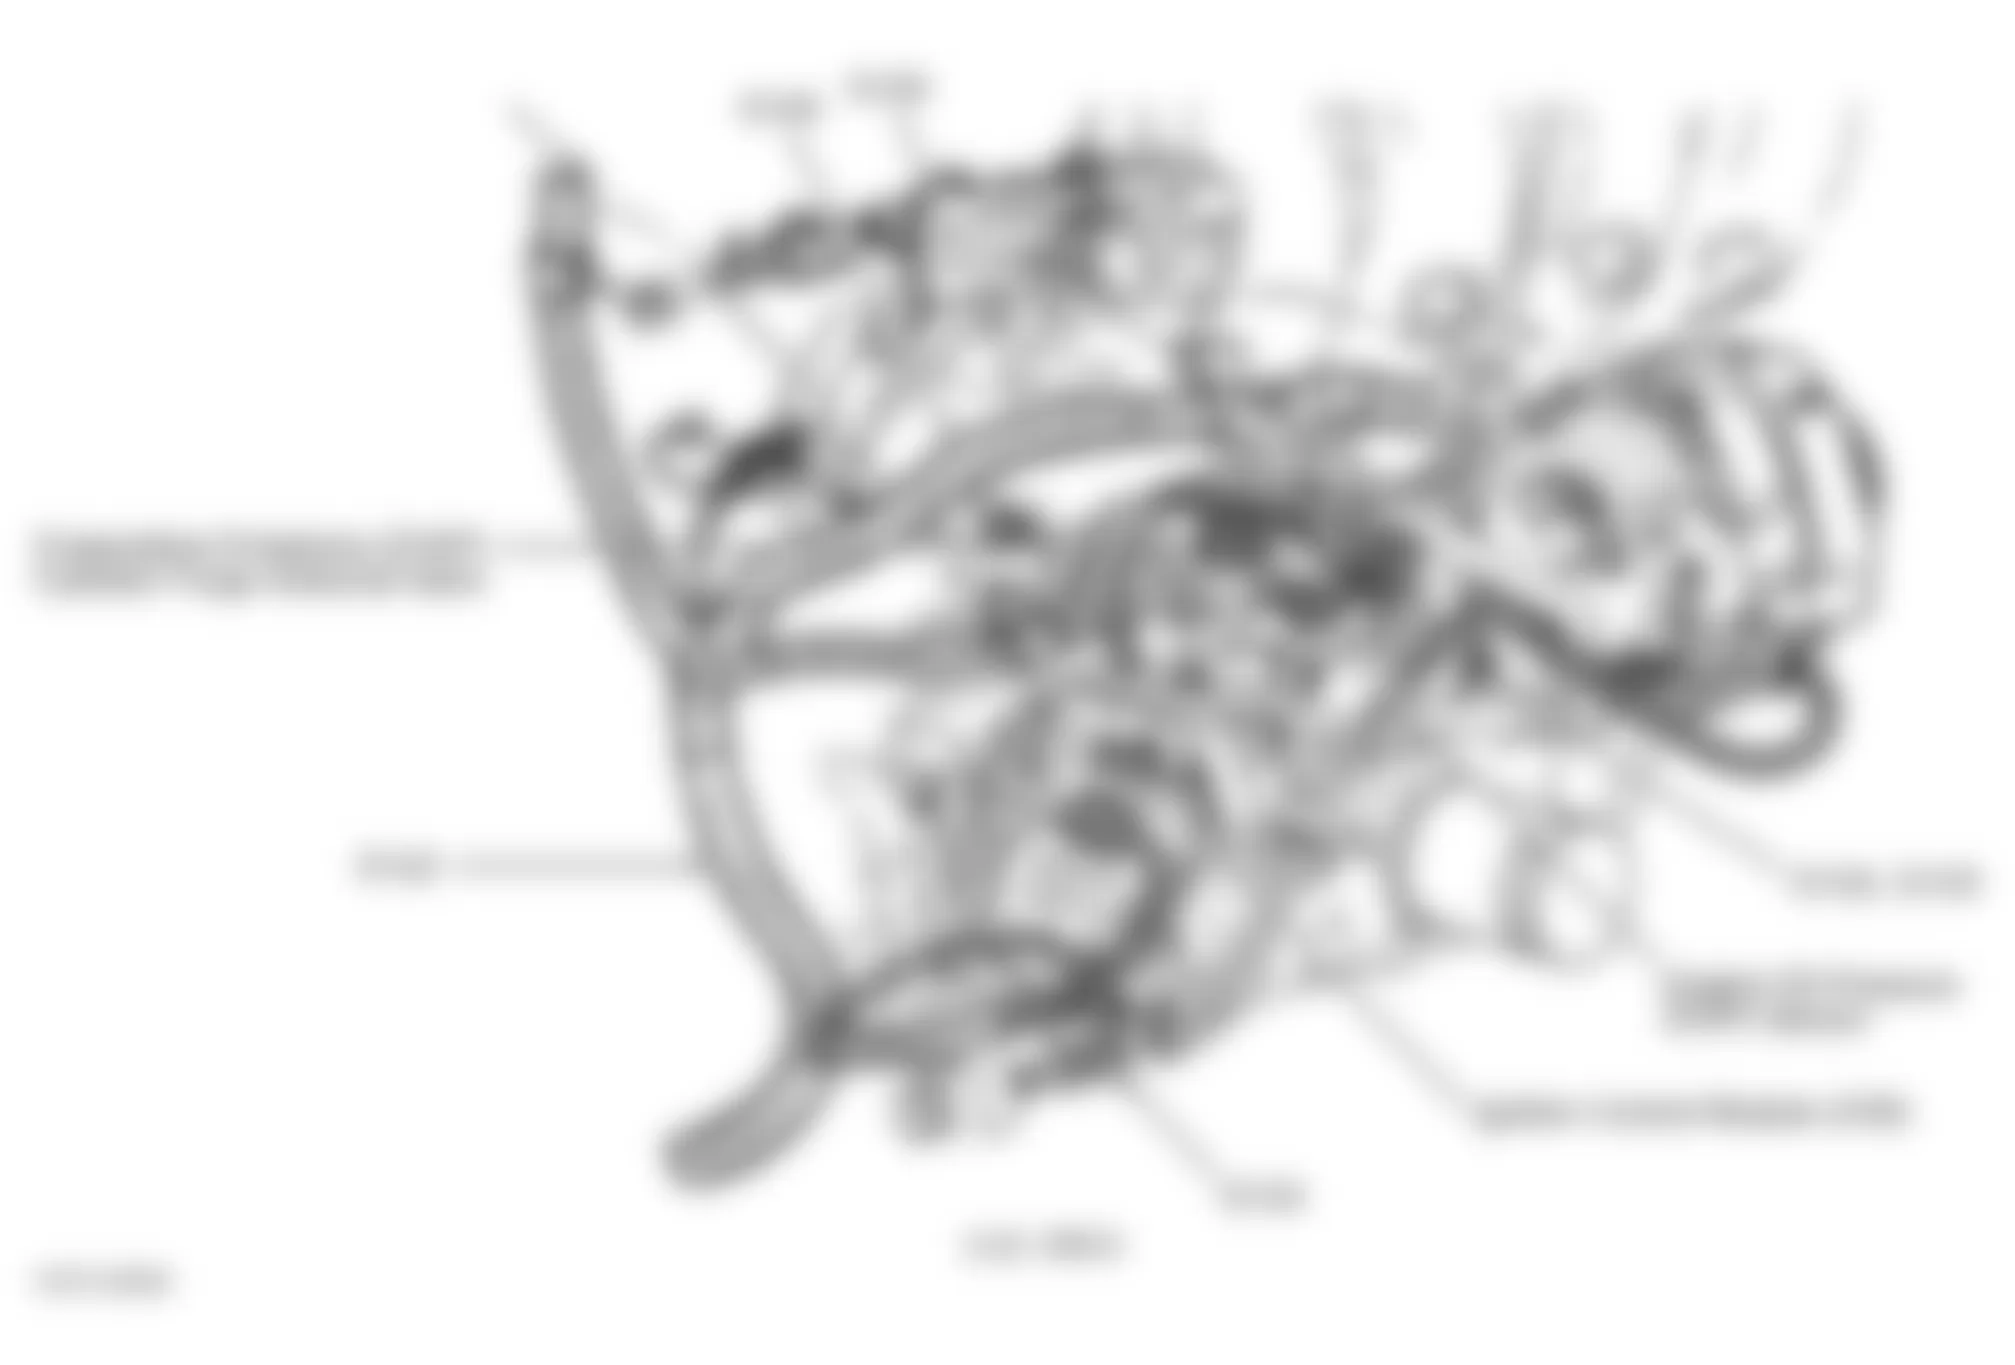 Chevrolet Blazer 2001 - Component Locations -  Right Side Of Engine (2.2L VIN 5)